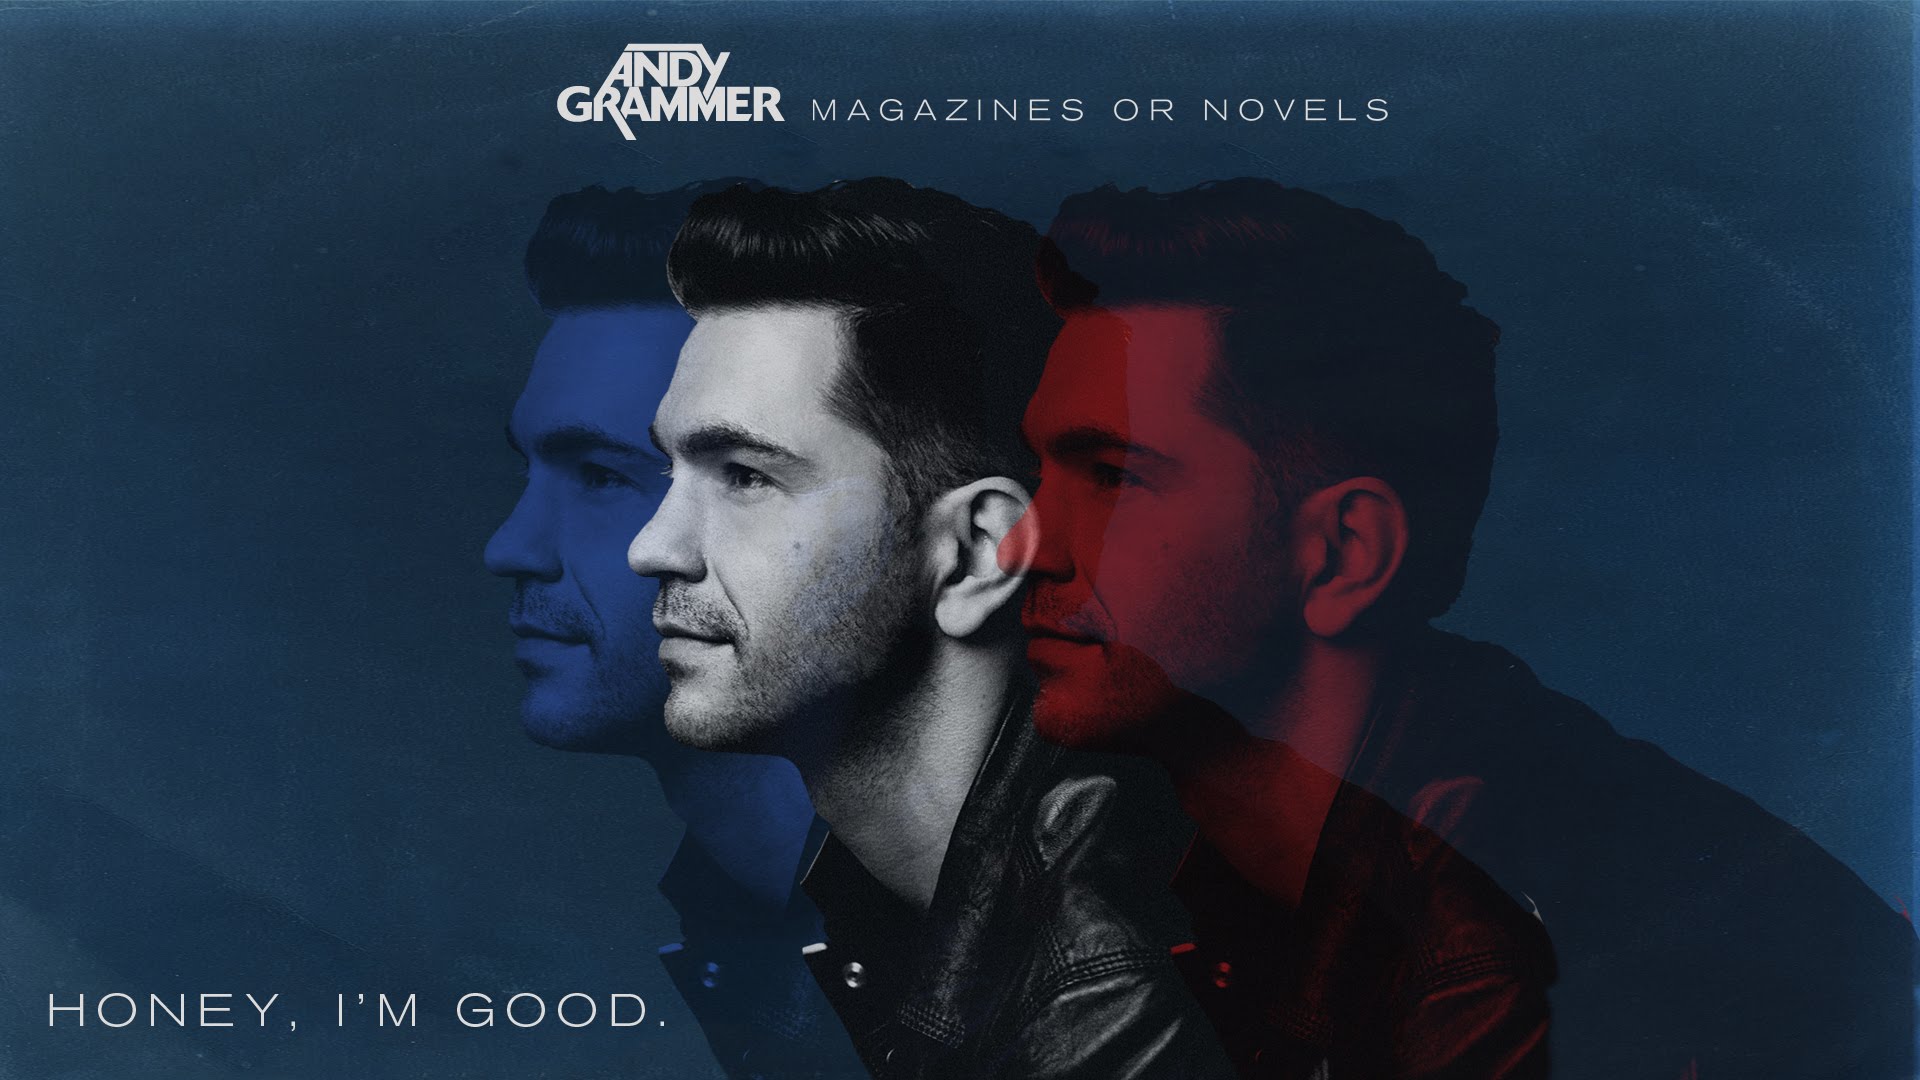 TOBE English Songs - Andy Grammer